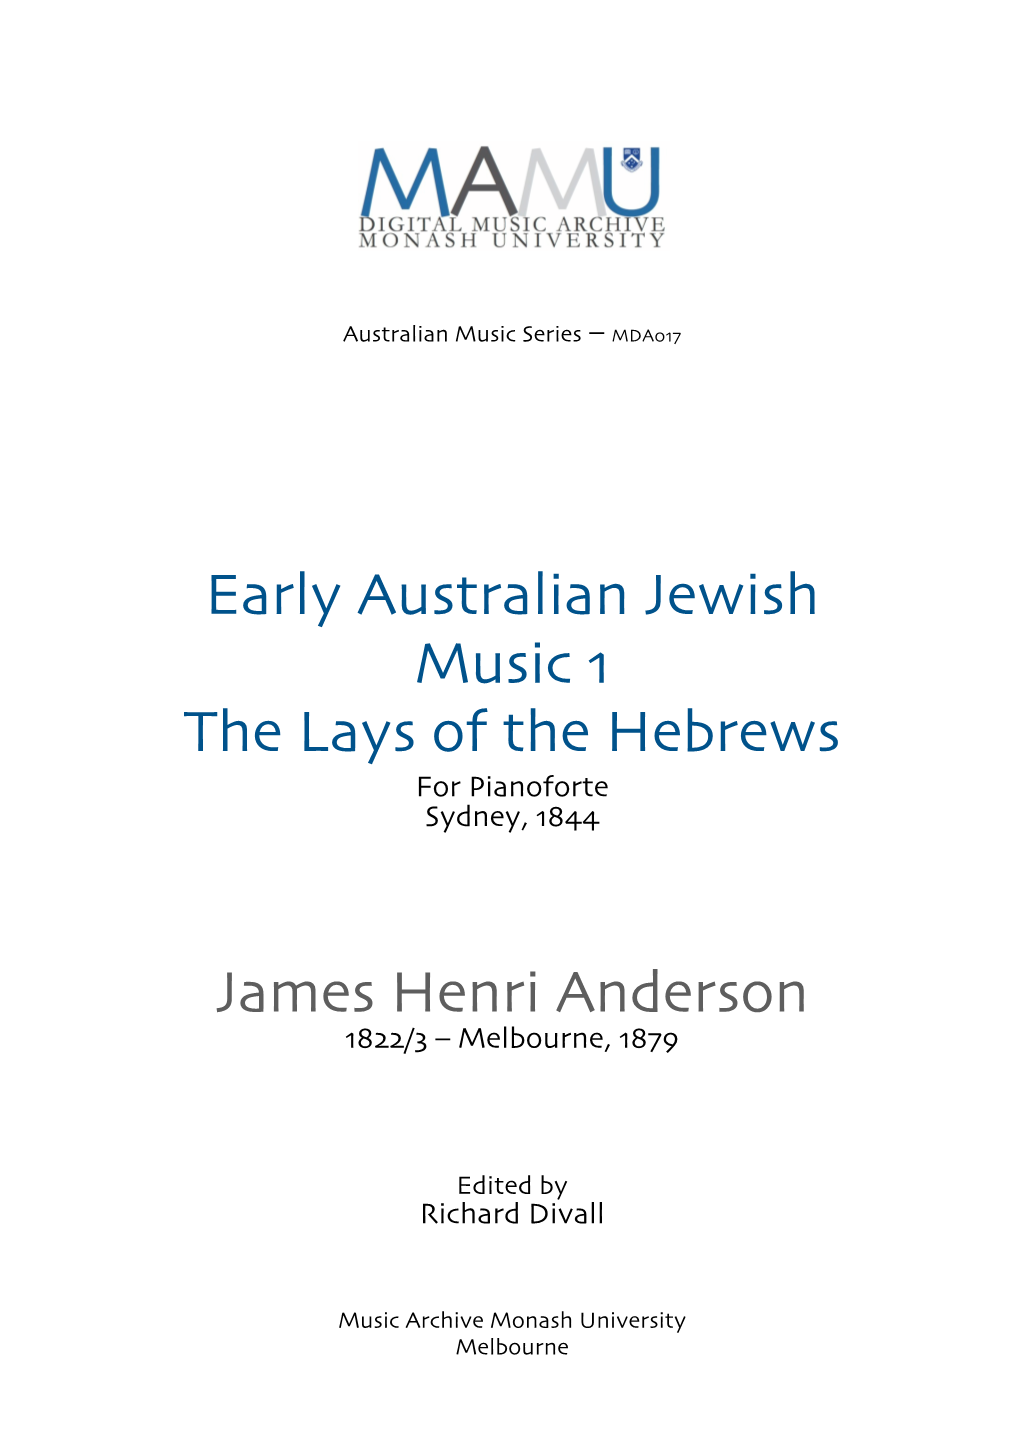 Early Australian Jewish Music 1 the Lays of the Hebrews for Pianoforte Sydney, 1844